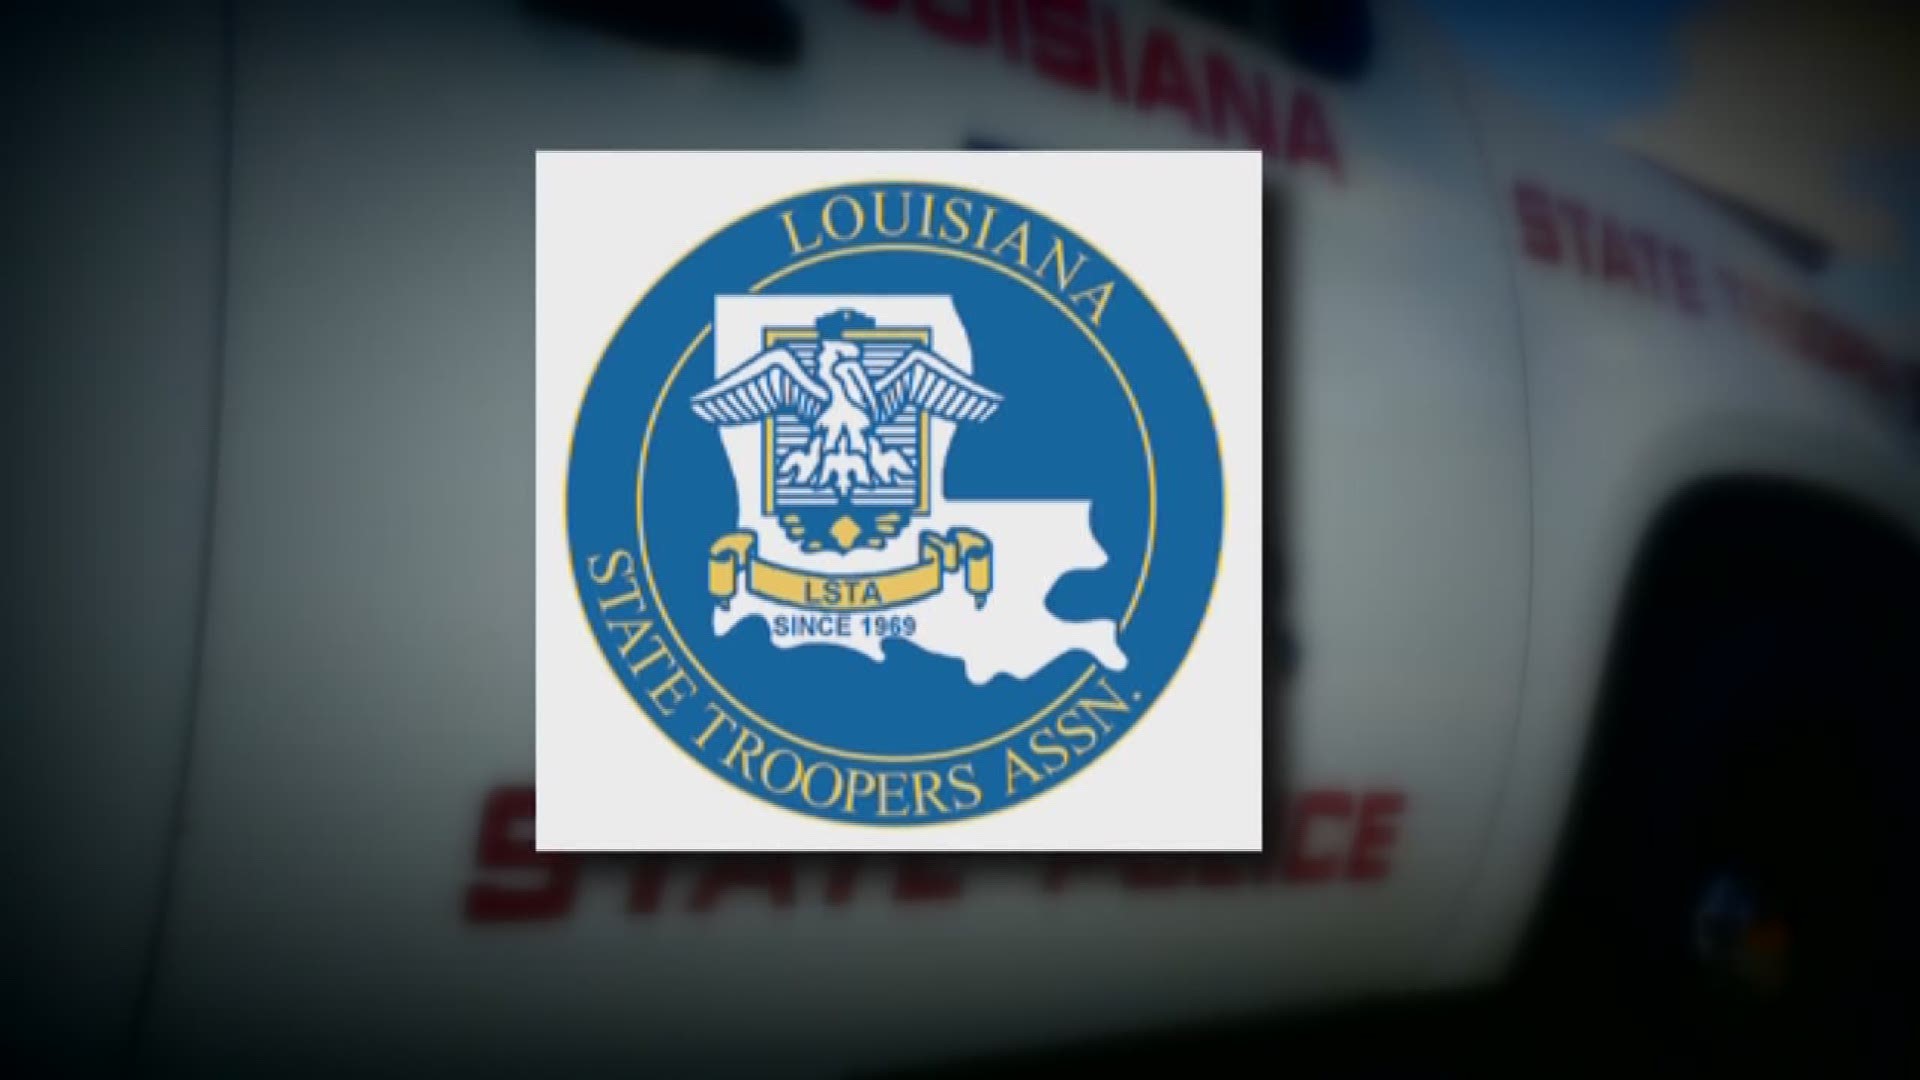 Katie Moore talks about a probe into the Louisiana State Troopers Association.